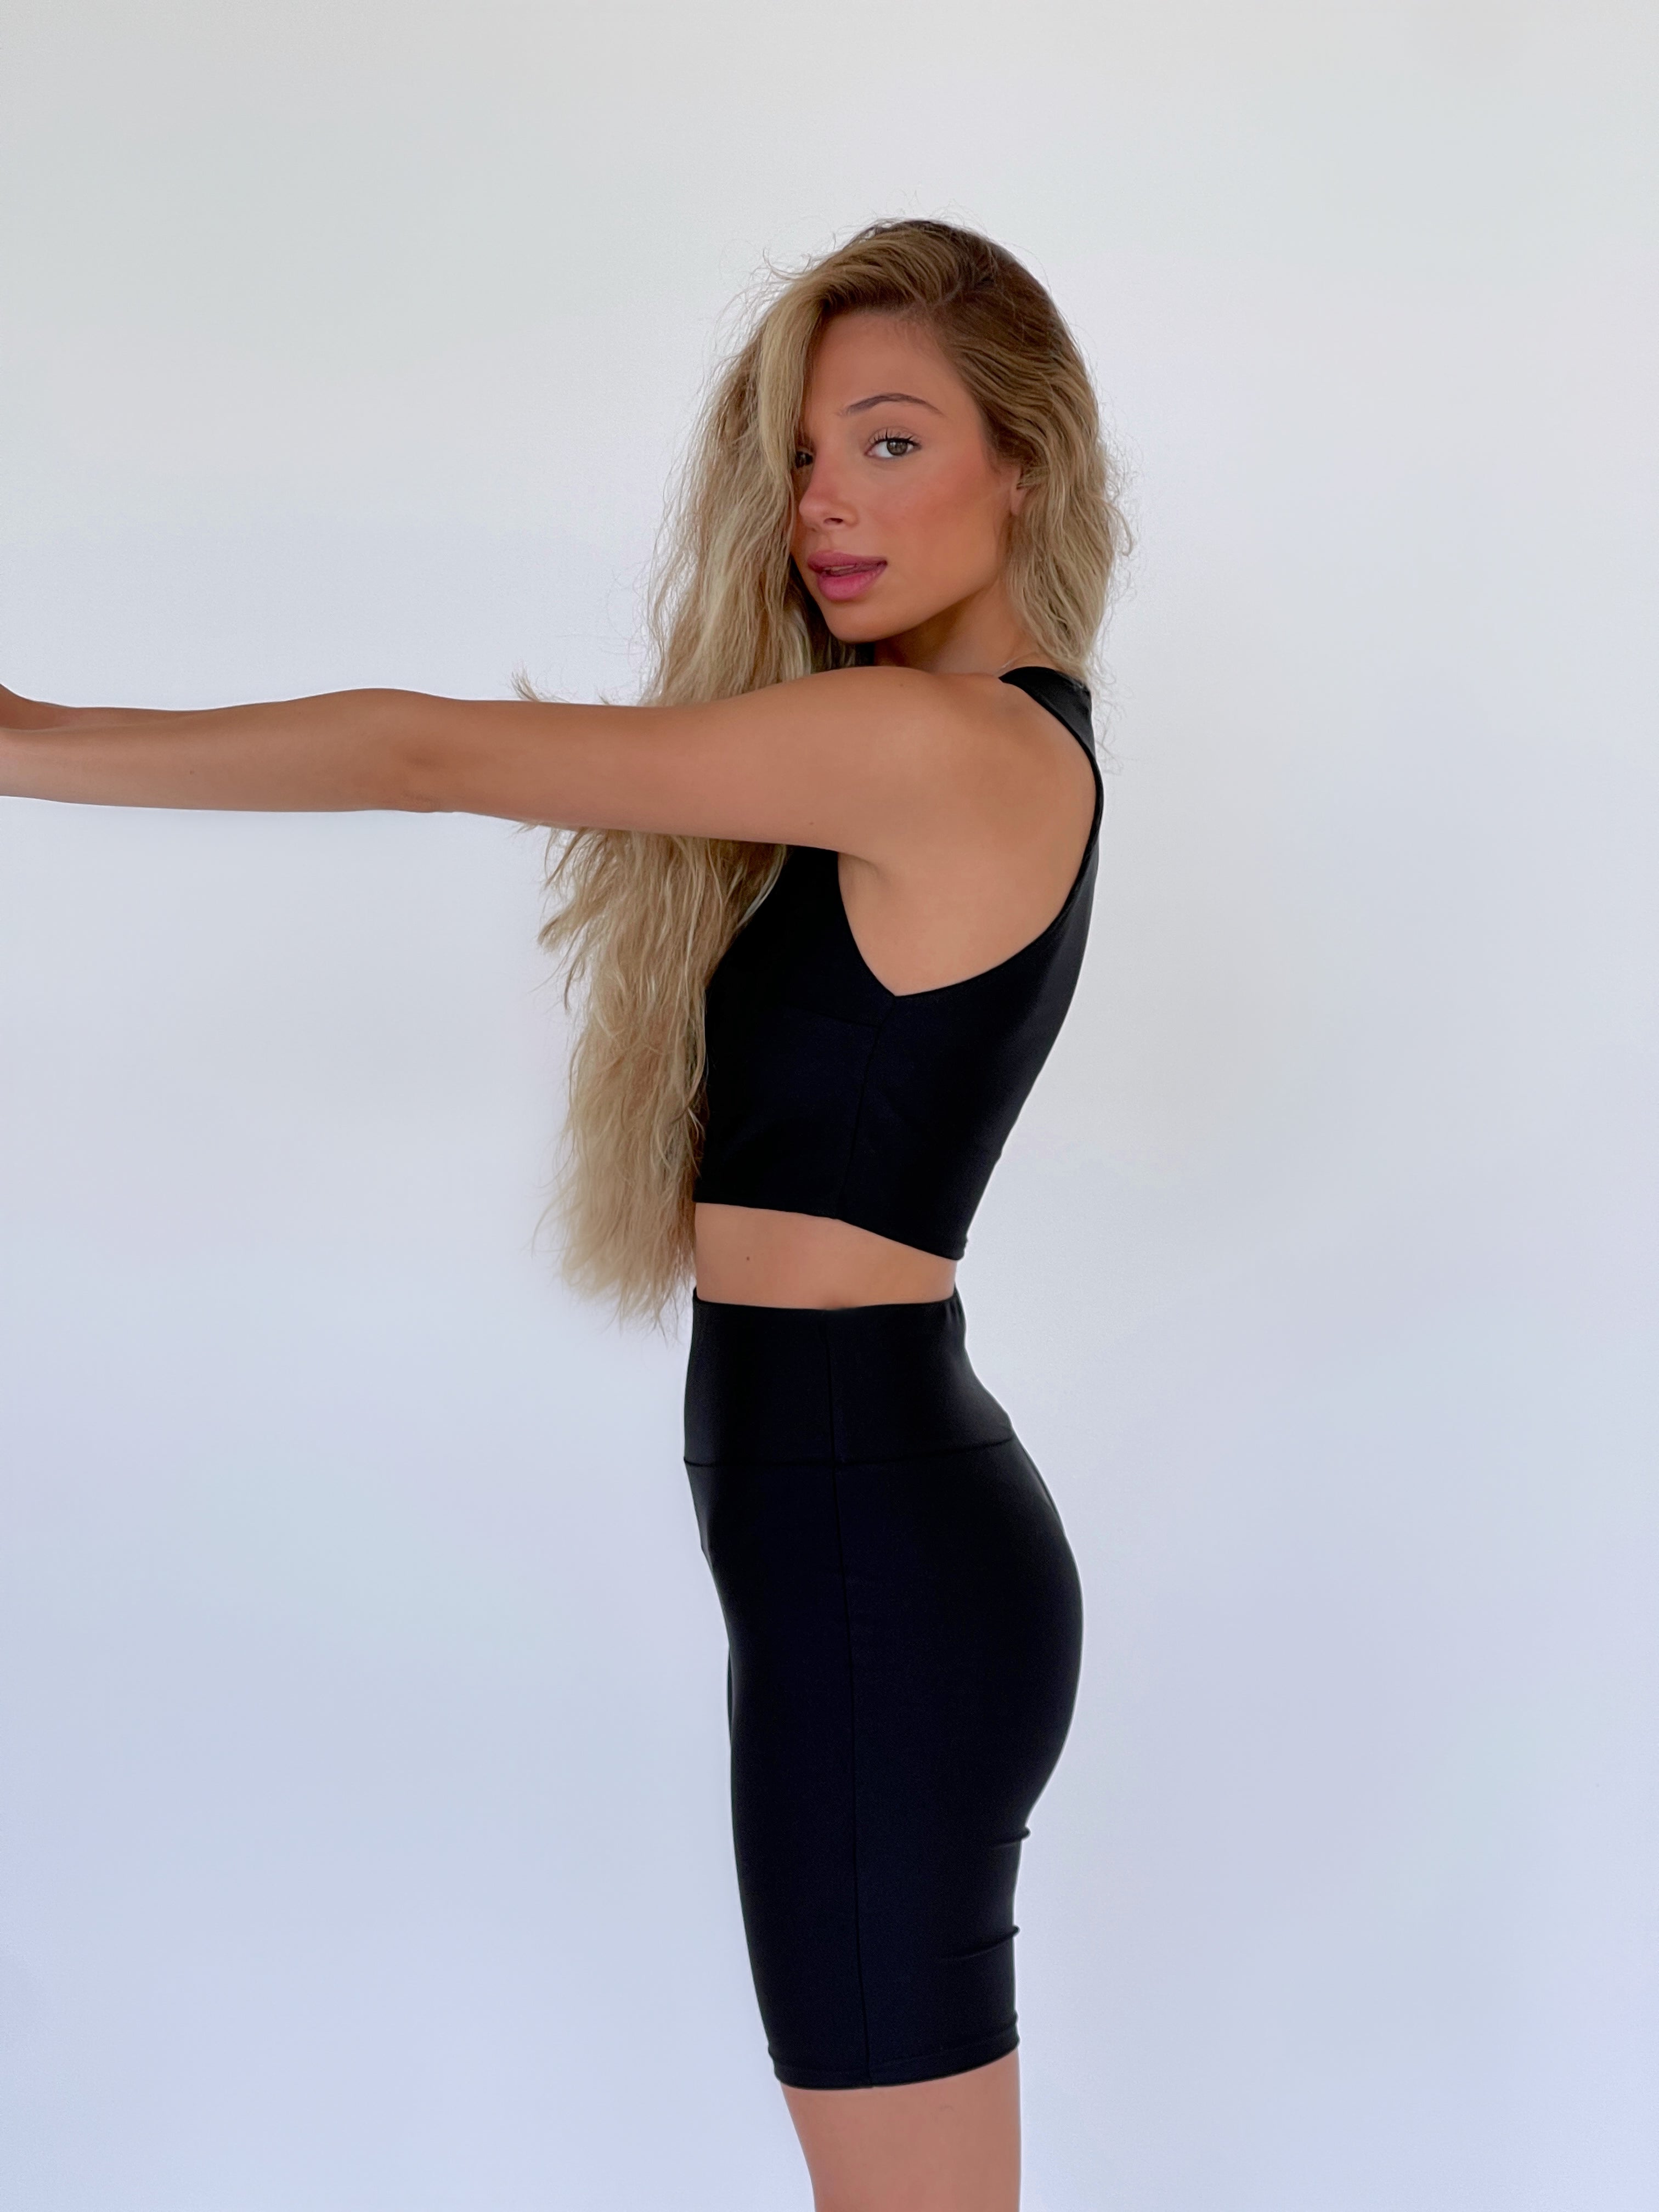 CROP TOP WITH MATCHING LEGGING SHORTS IN BLACK